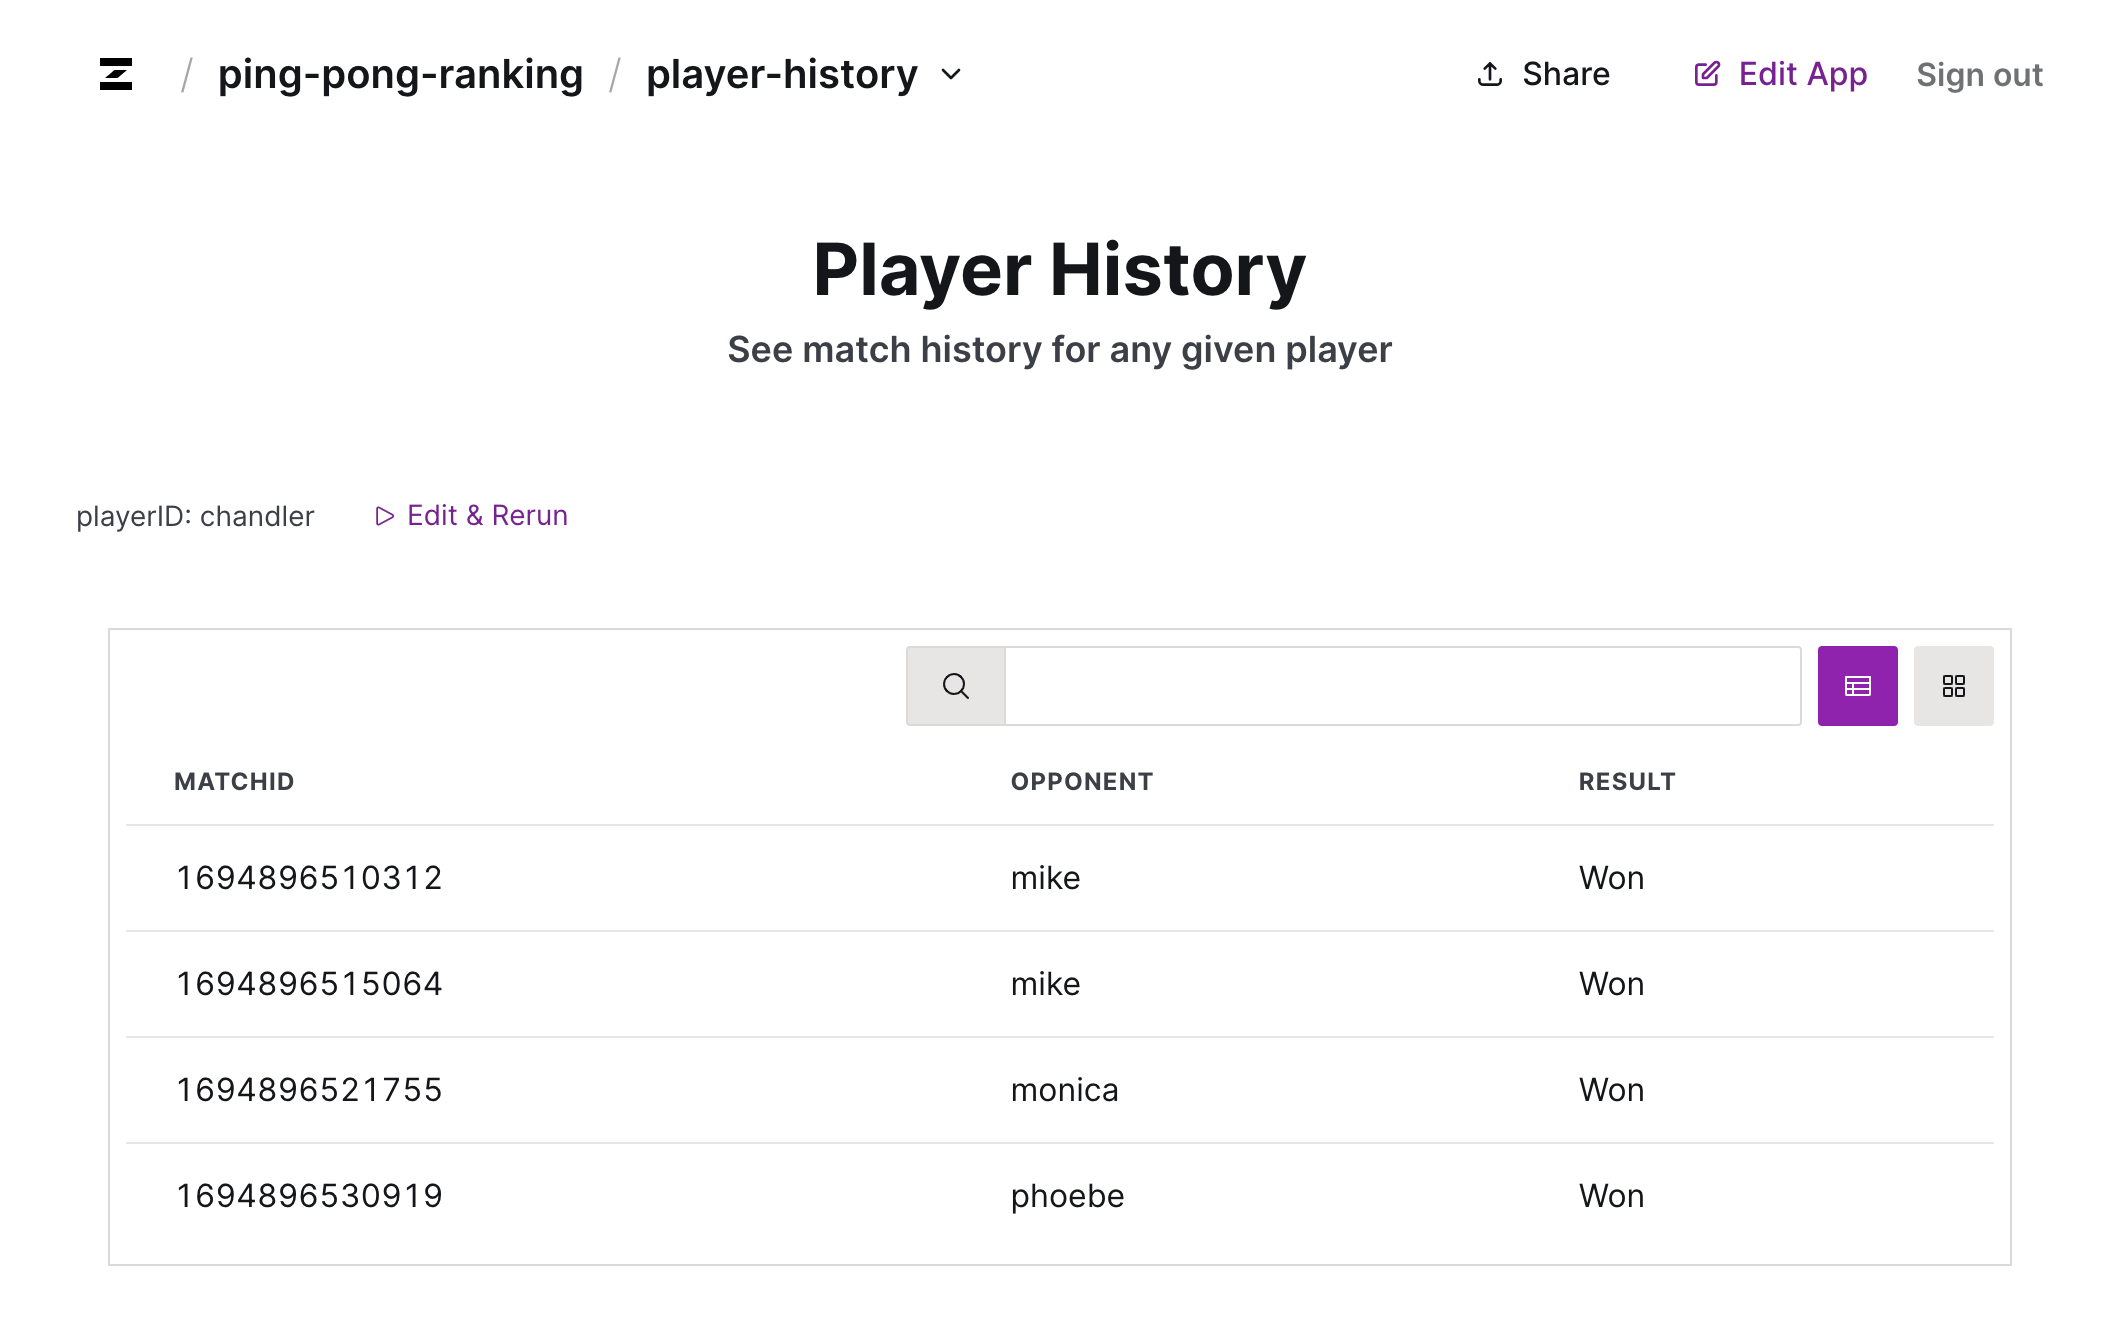 Ping pong ranking app — Player history page